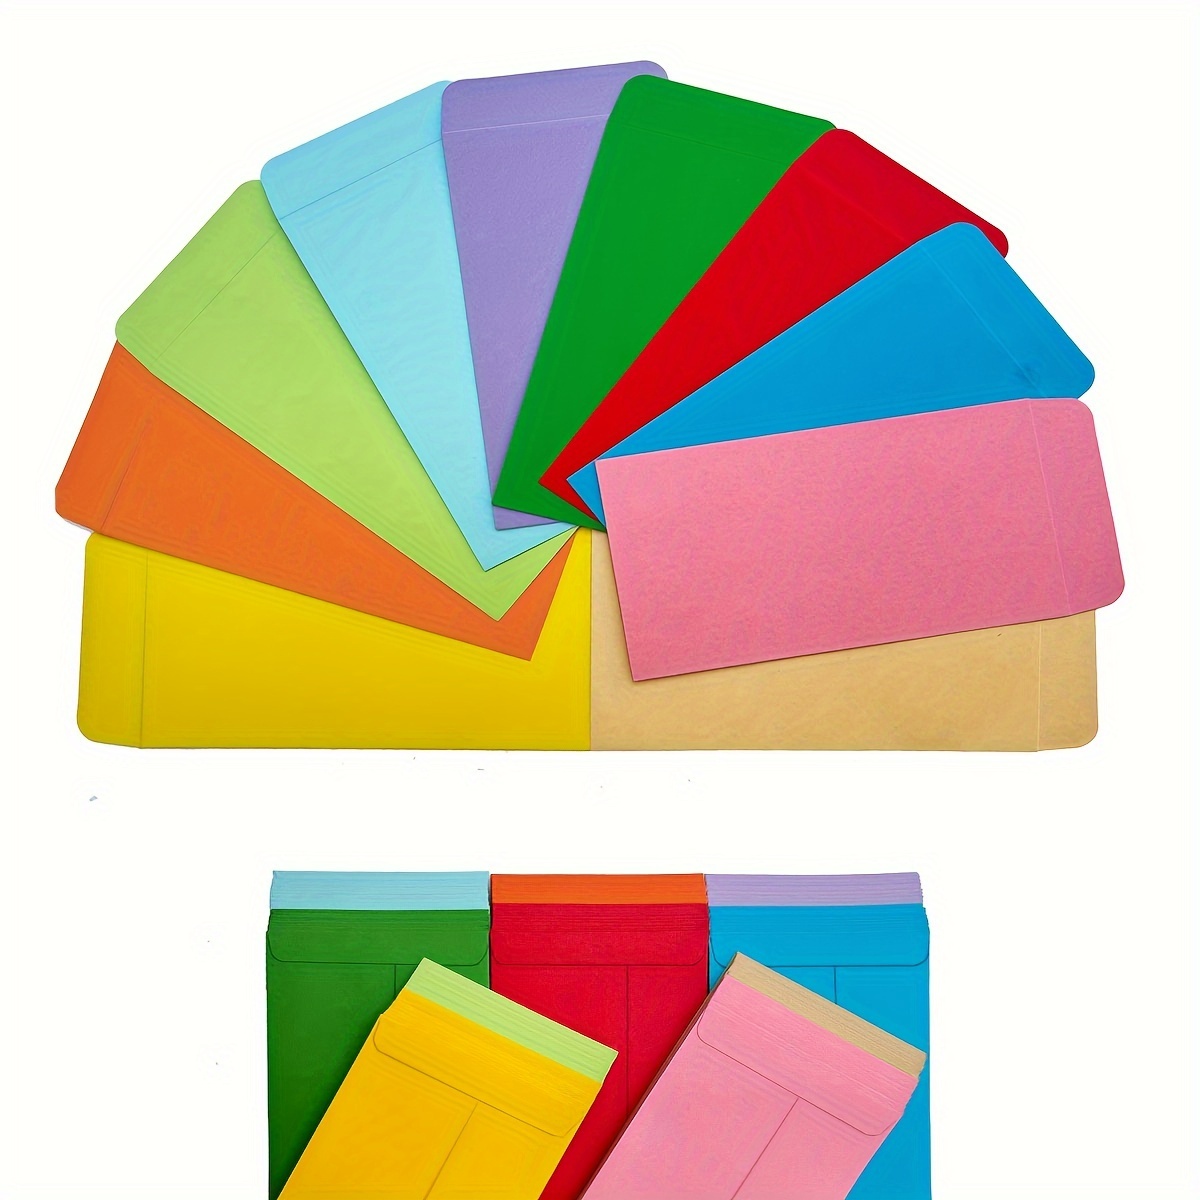 200 Pieces Colorful Small Coin Envelopes Self-Adhesive Seed